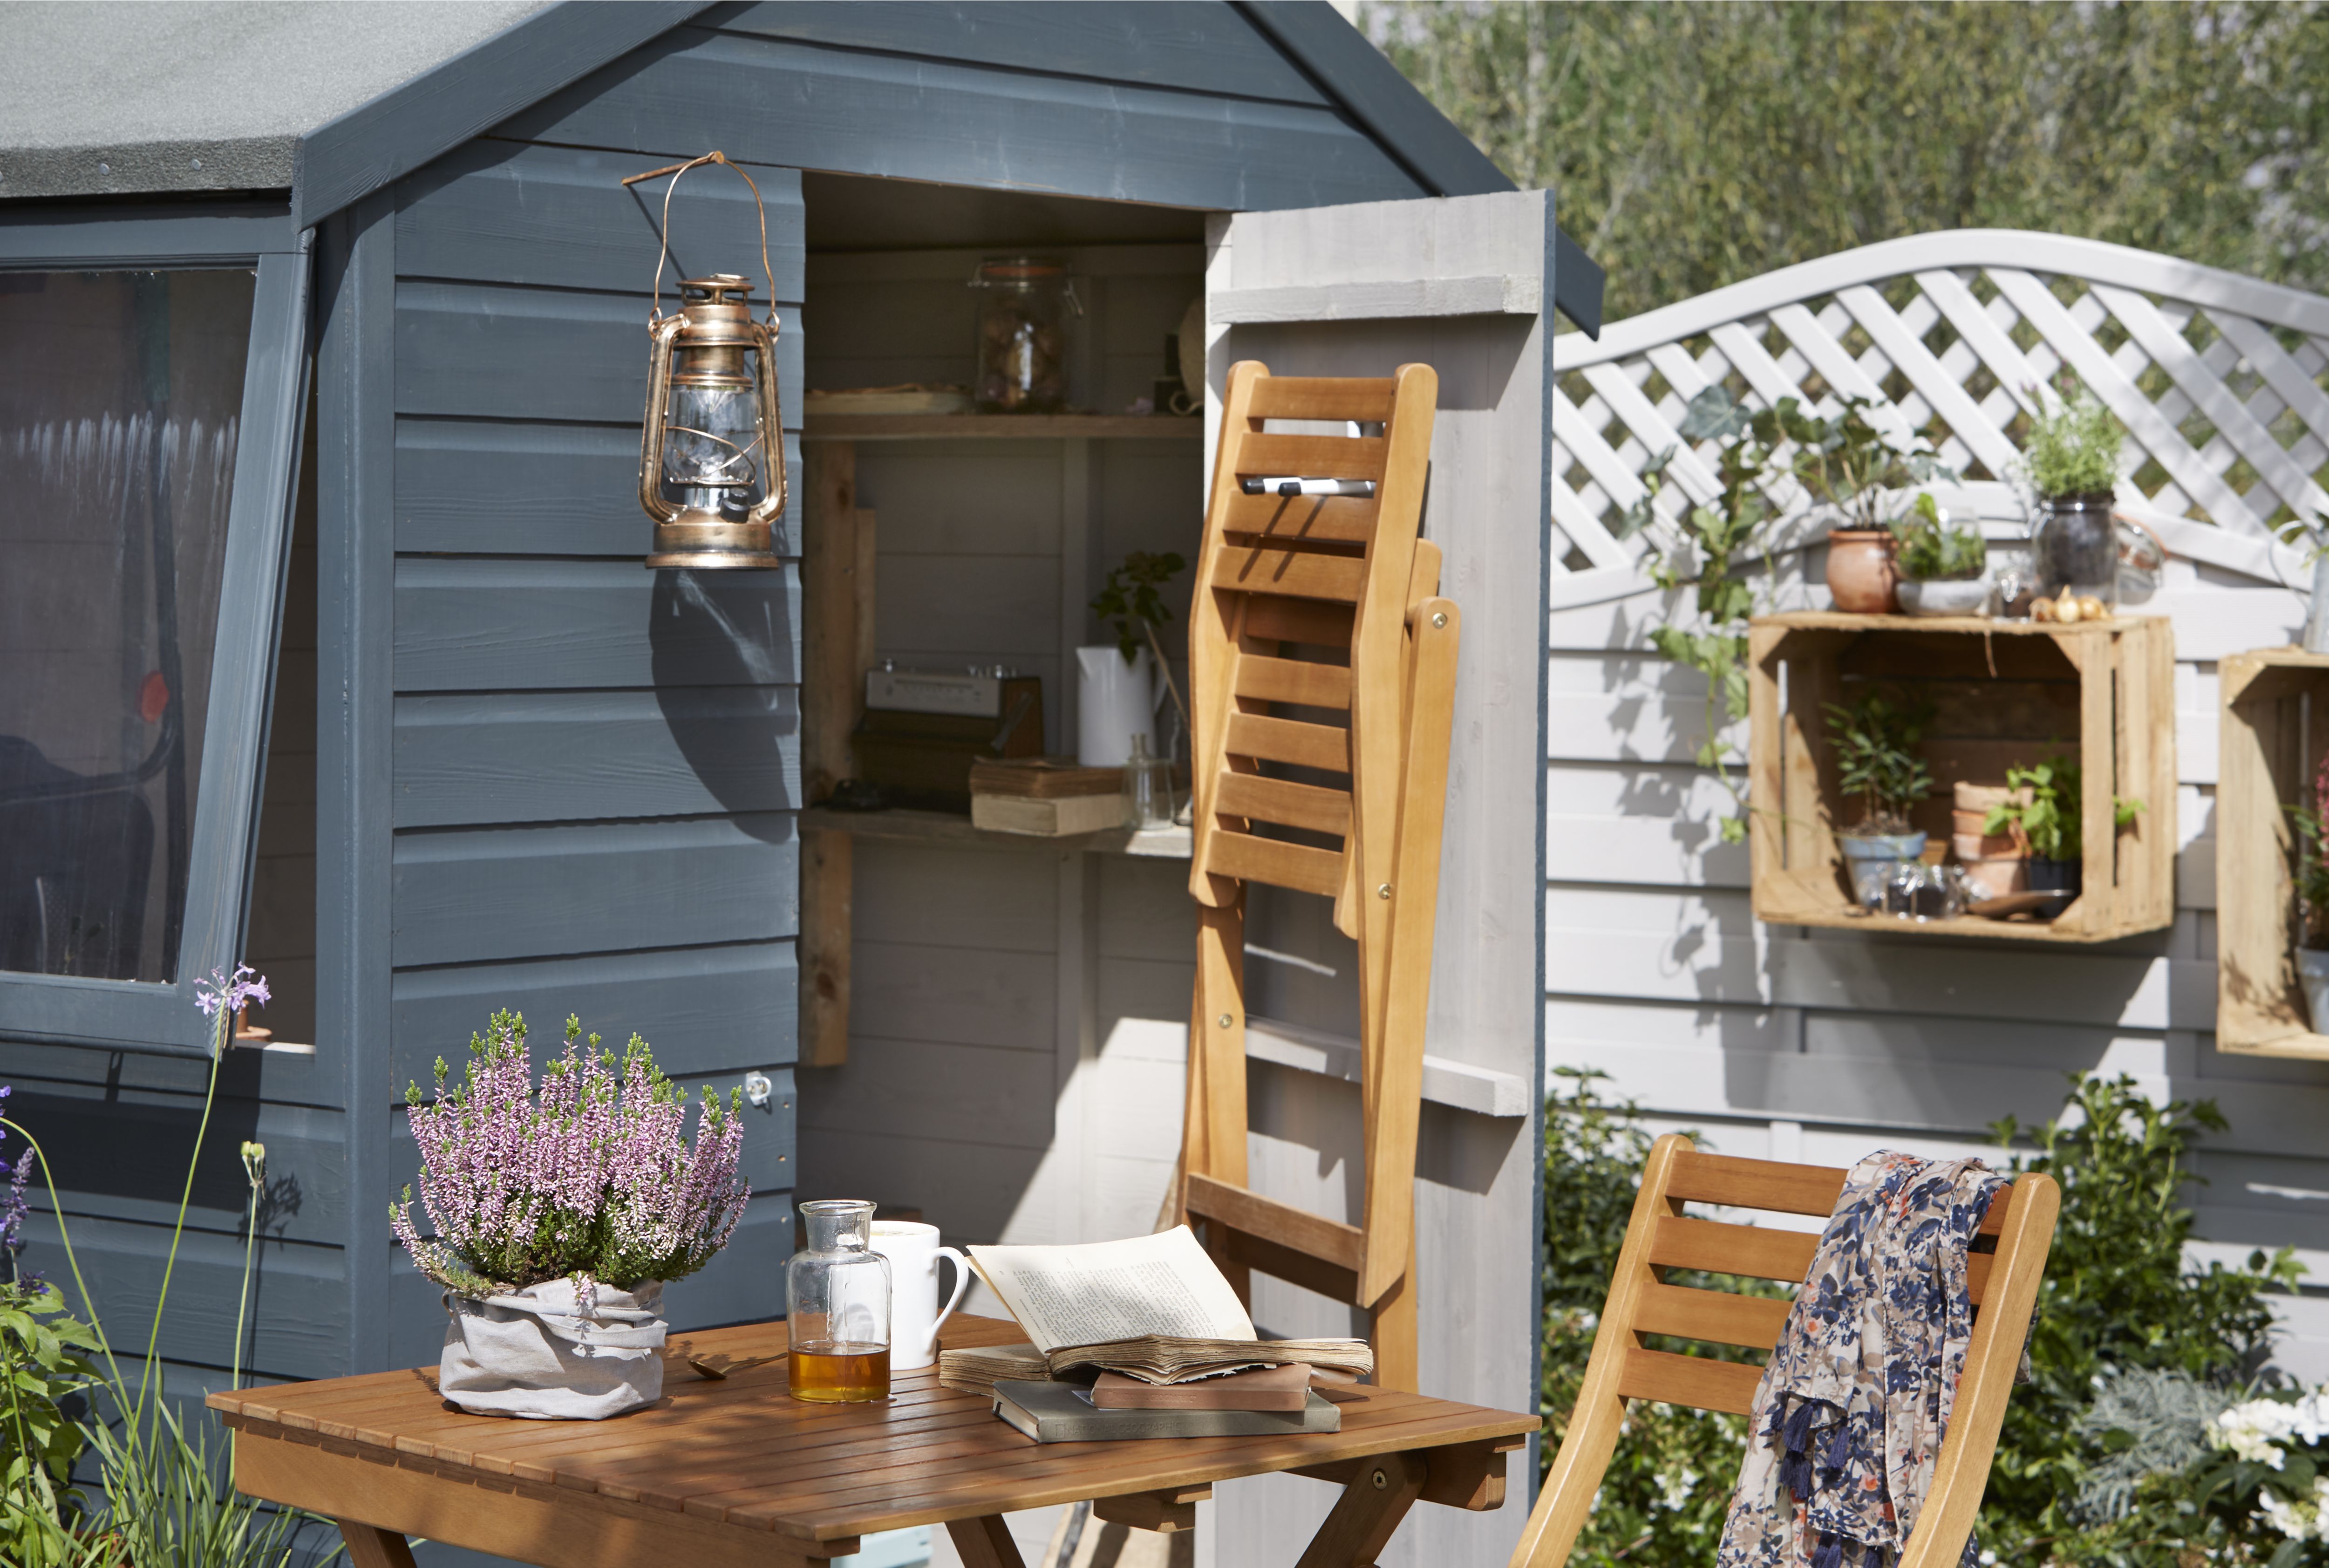 how to paint a wooden shed or fence ideas & advice diy